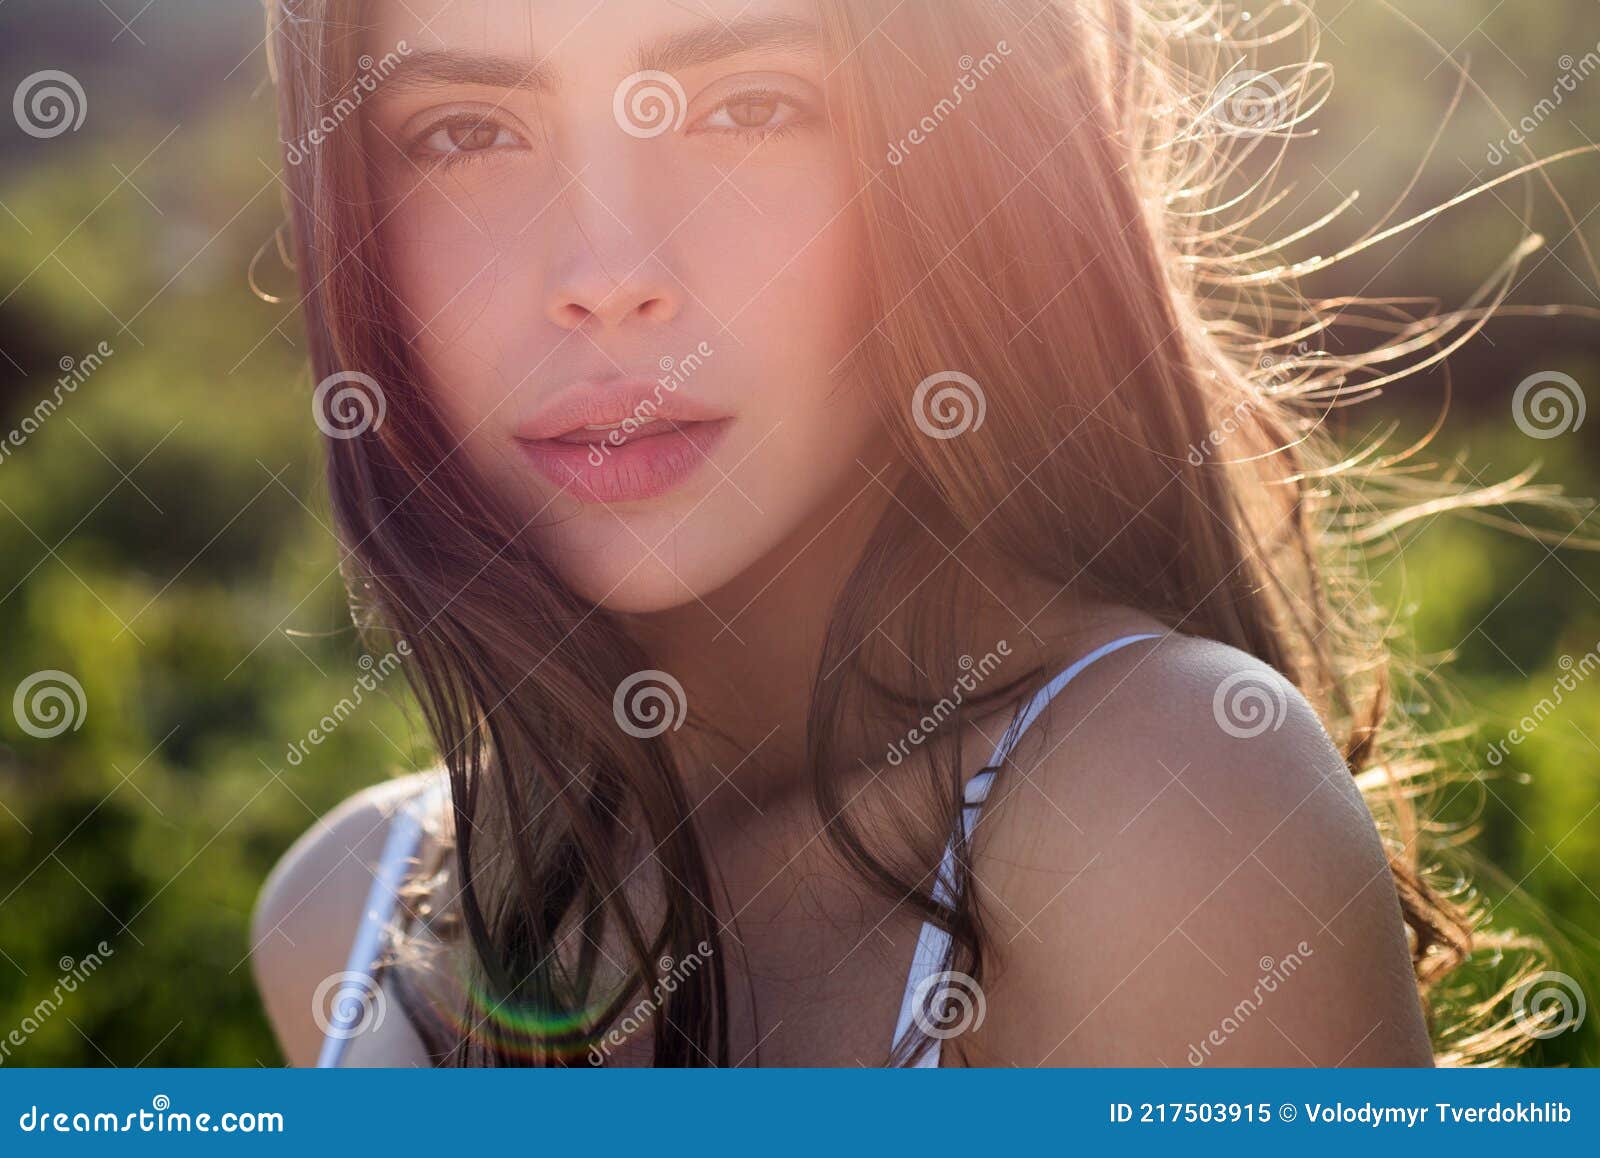 1600px x 1158px - Portrait of Beautiful Model with Natural Nude Make Up. Beauty Girl Face.  Young Sensual Woman Outdoors Portrait Stock Image - Image of elegant, face:  217503915